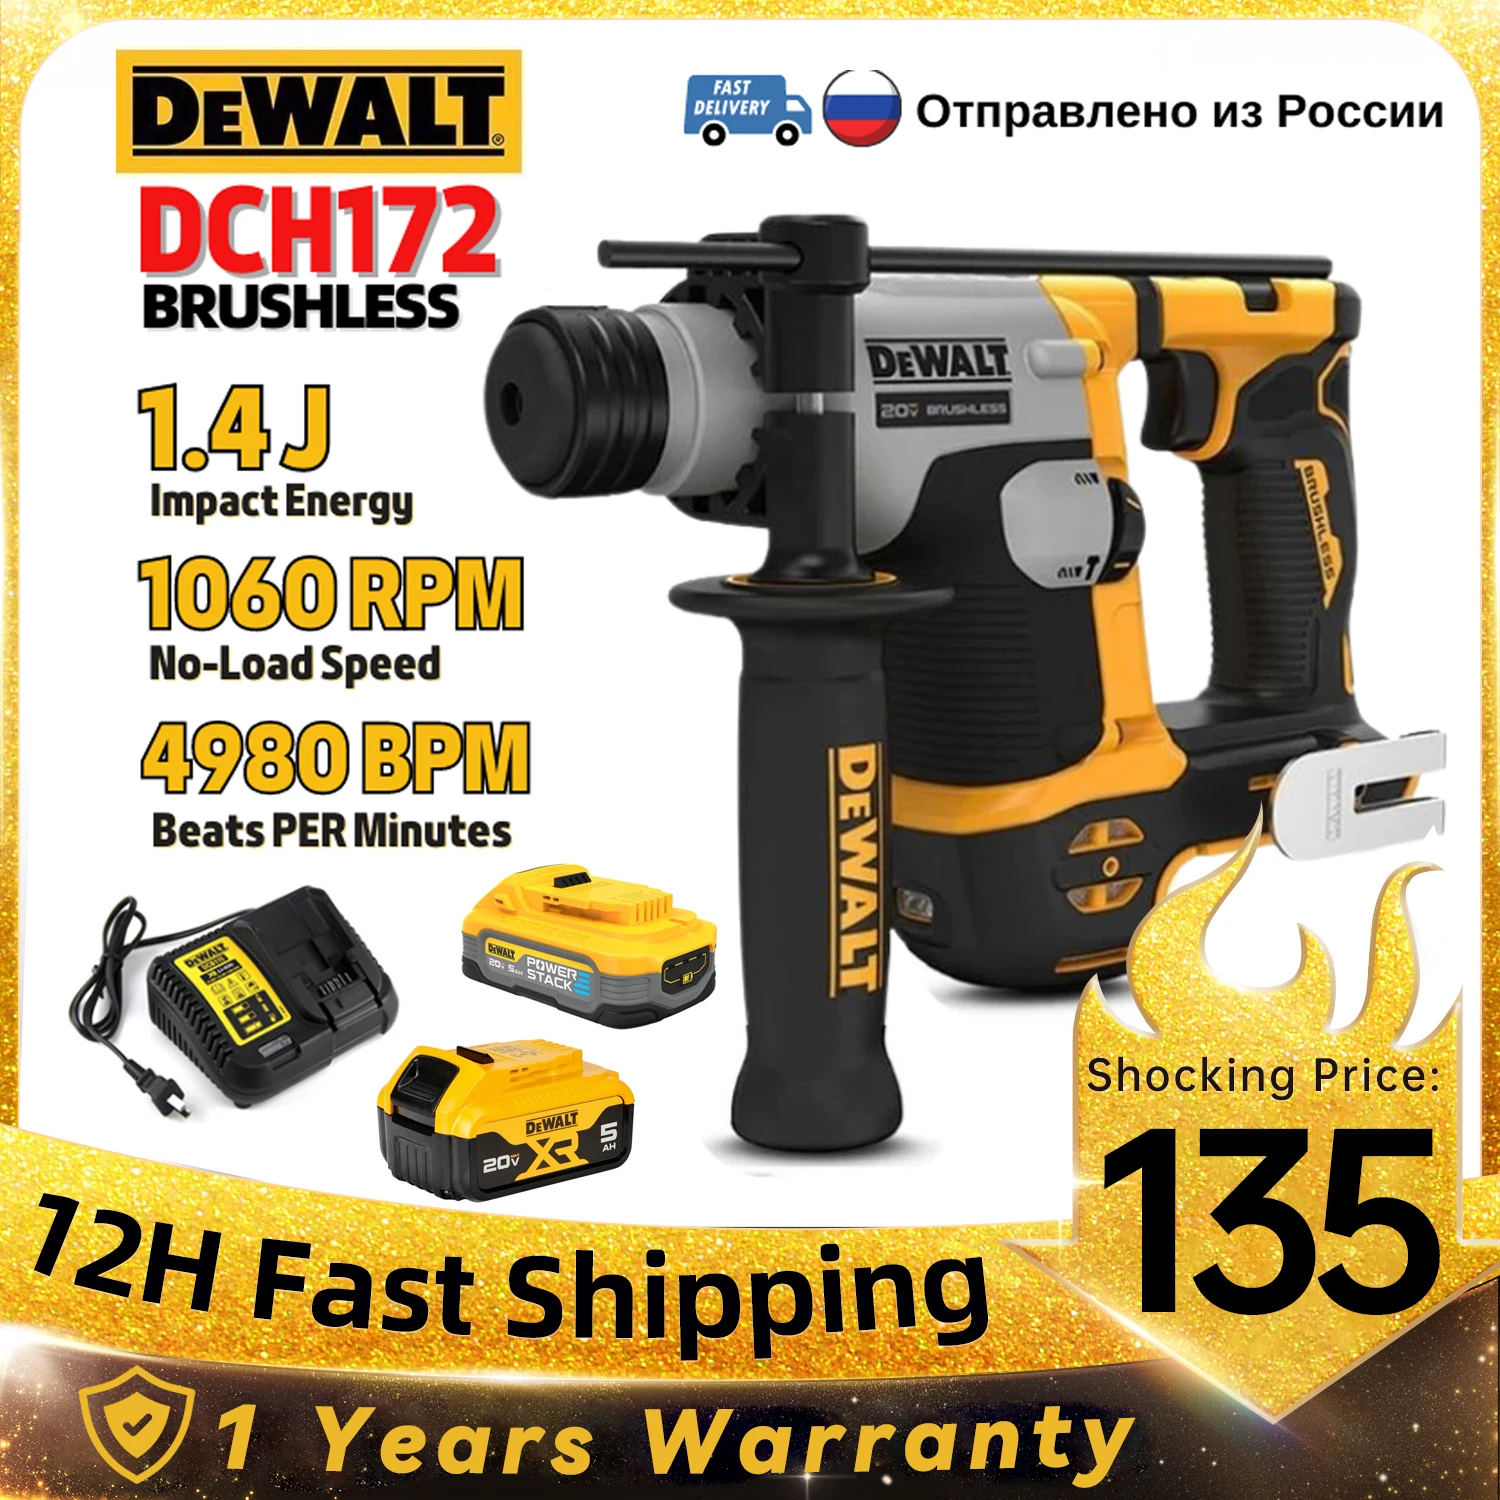 

DEWALT DCH172 Electric Hammer 20V MAX Rechargeable Brushless Lithium-Ion 5/8 Inch Cordless Rotary Compact Hammer Punching Tool